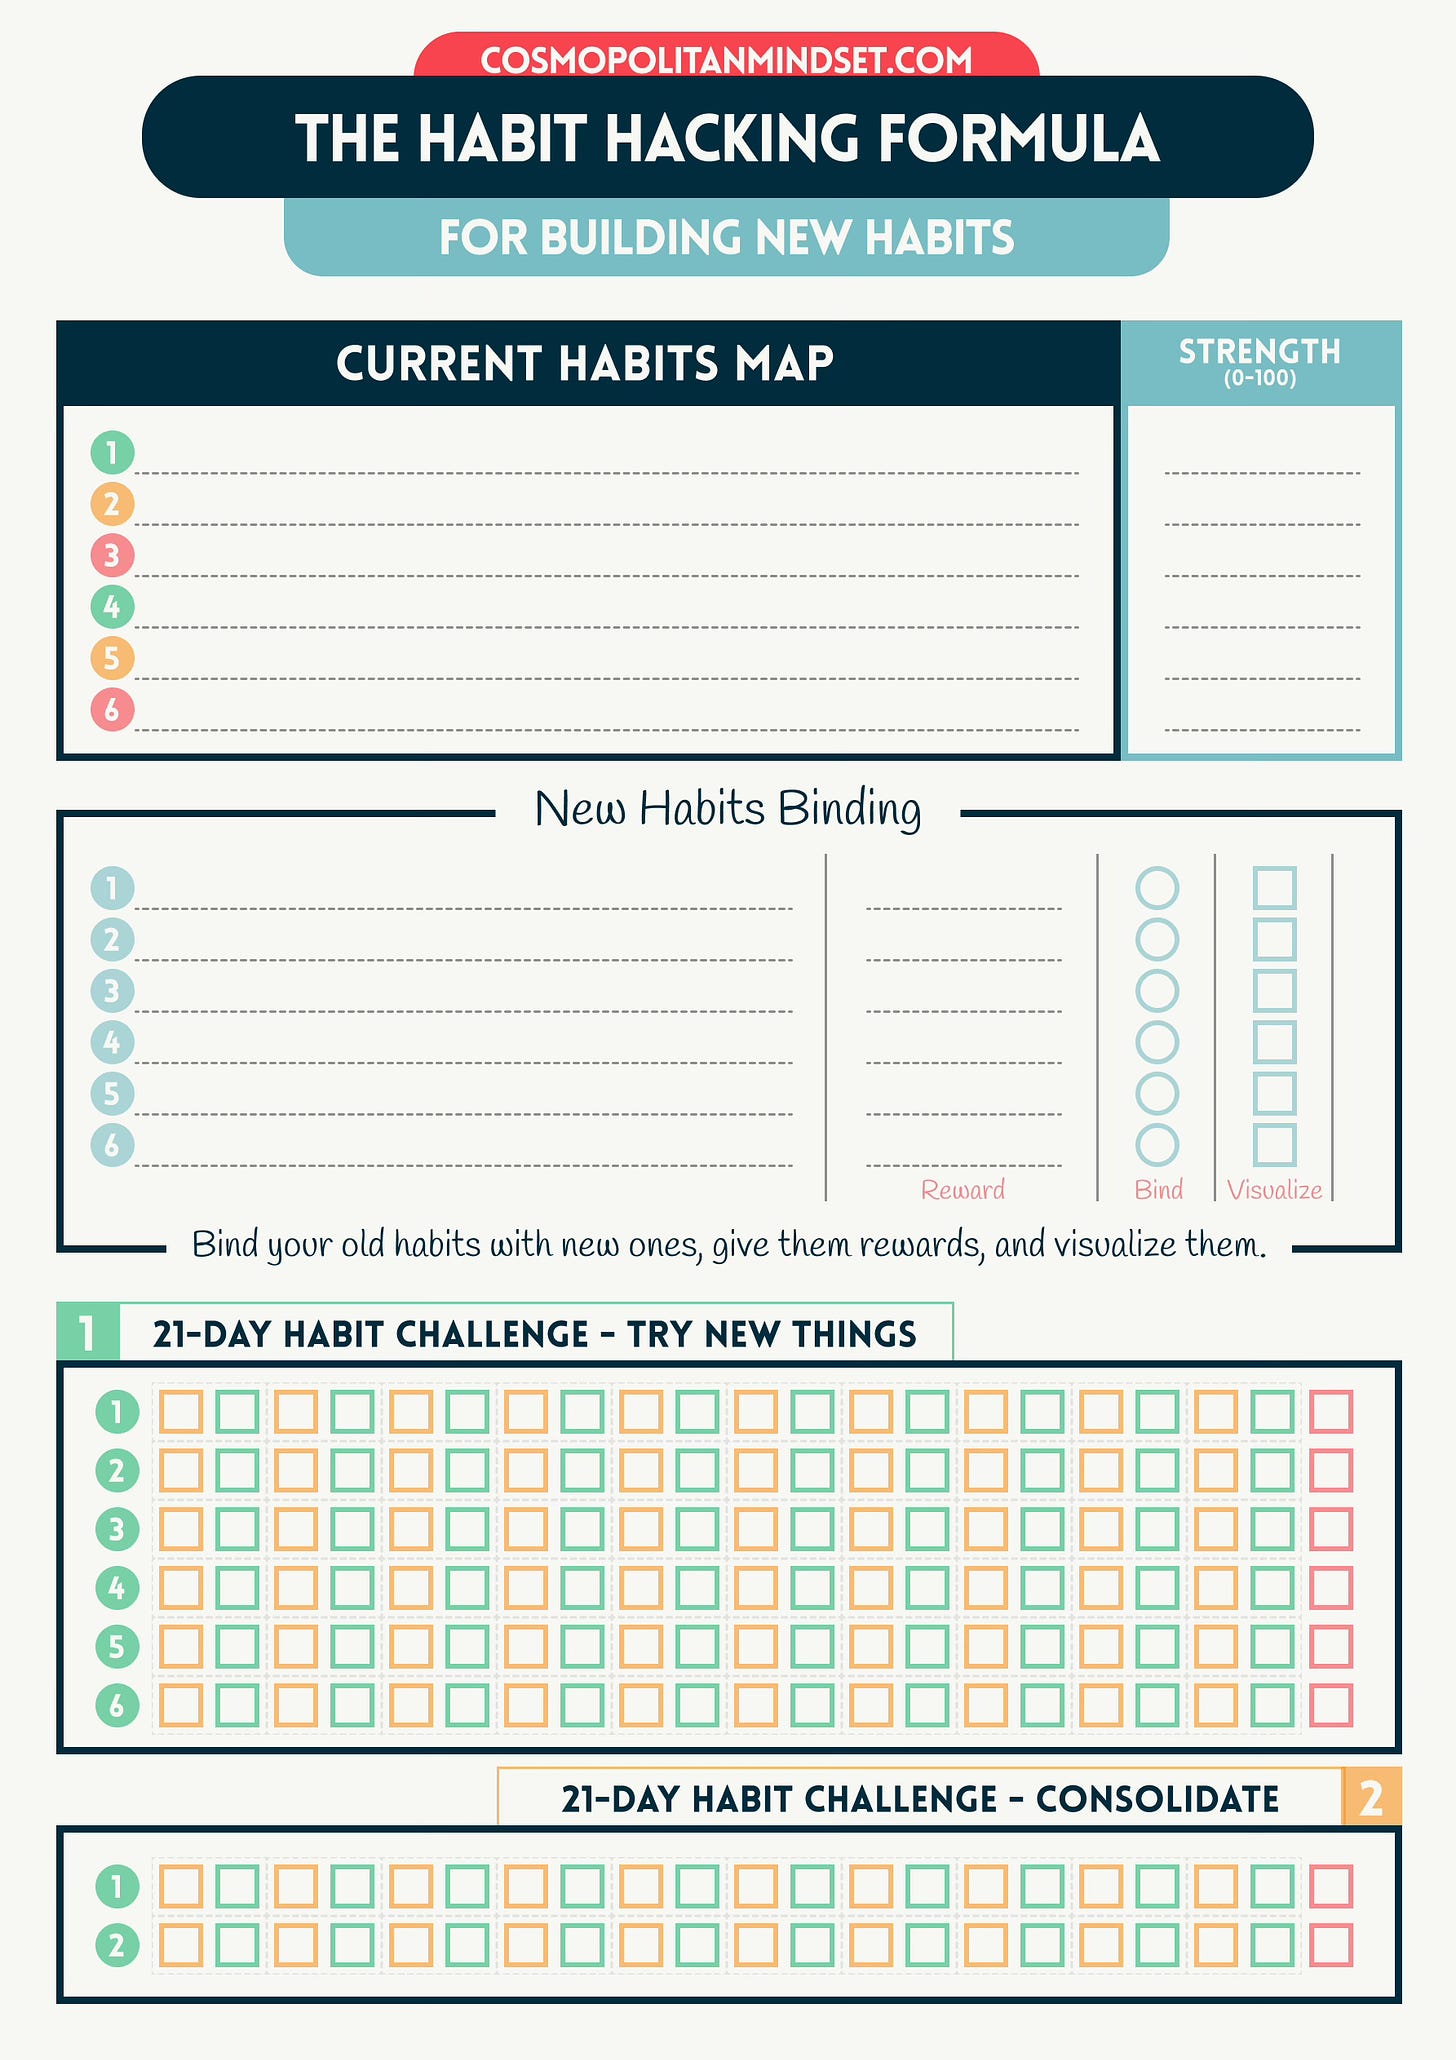 The Habit-Hacking Formula for Building New Habits Infographic